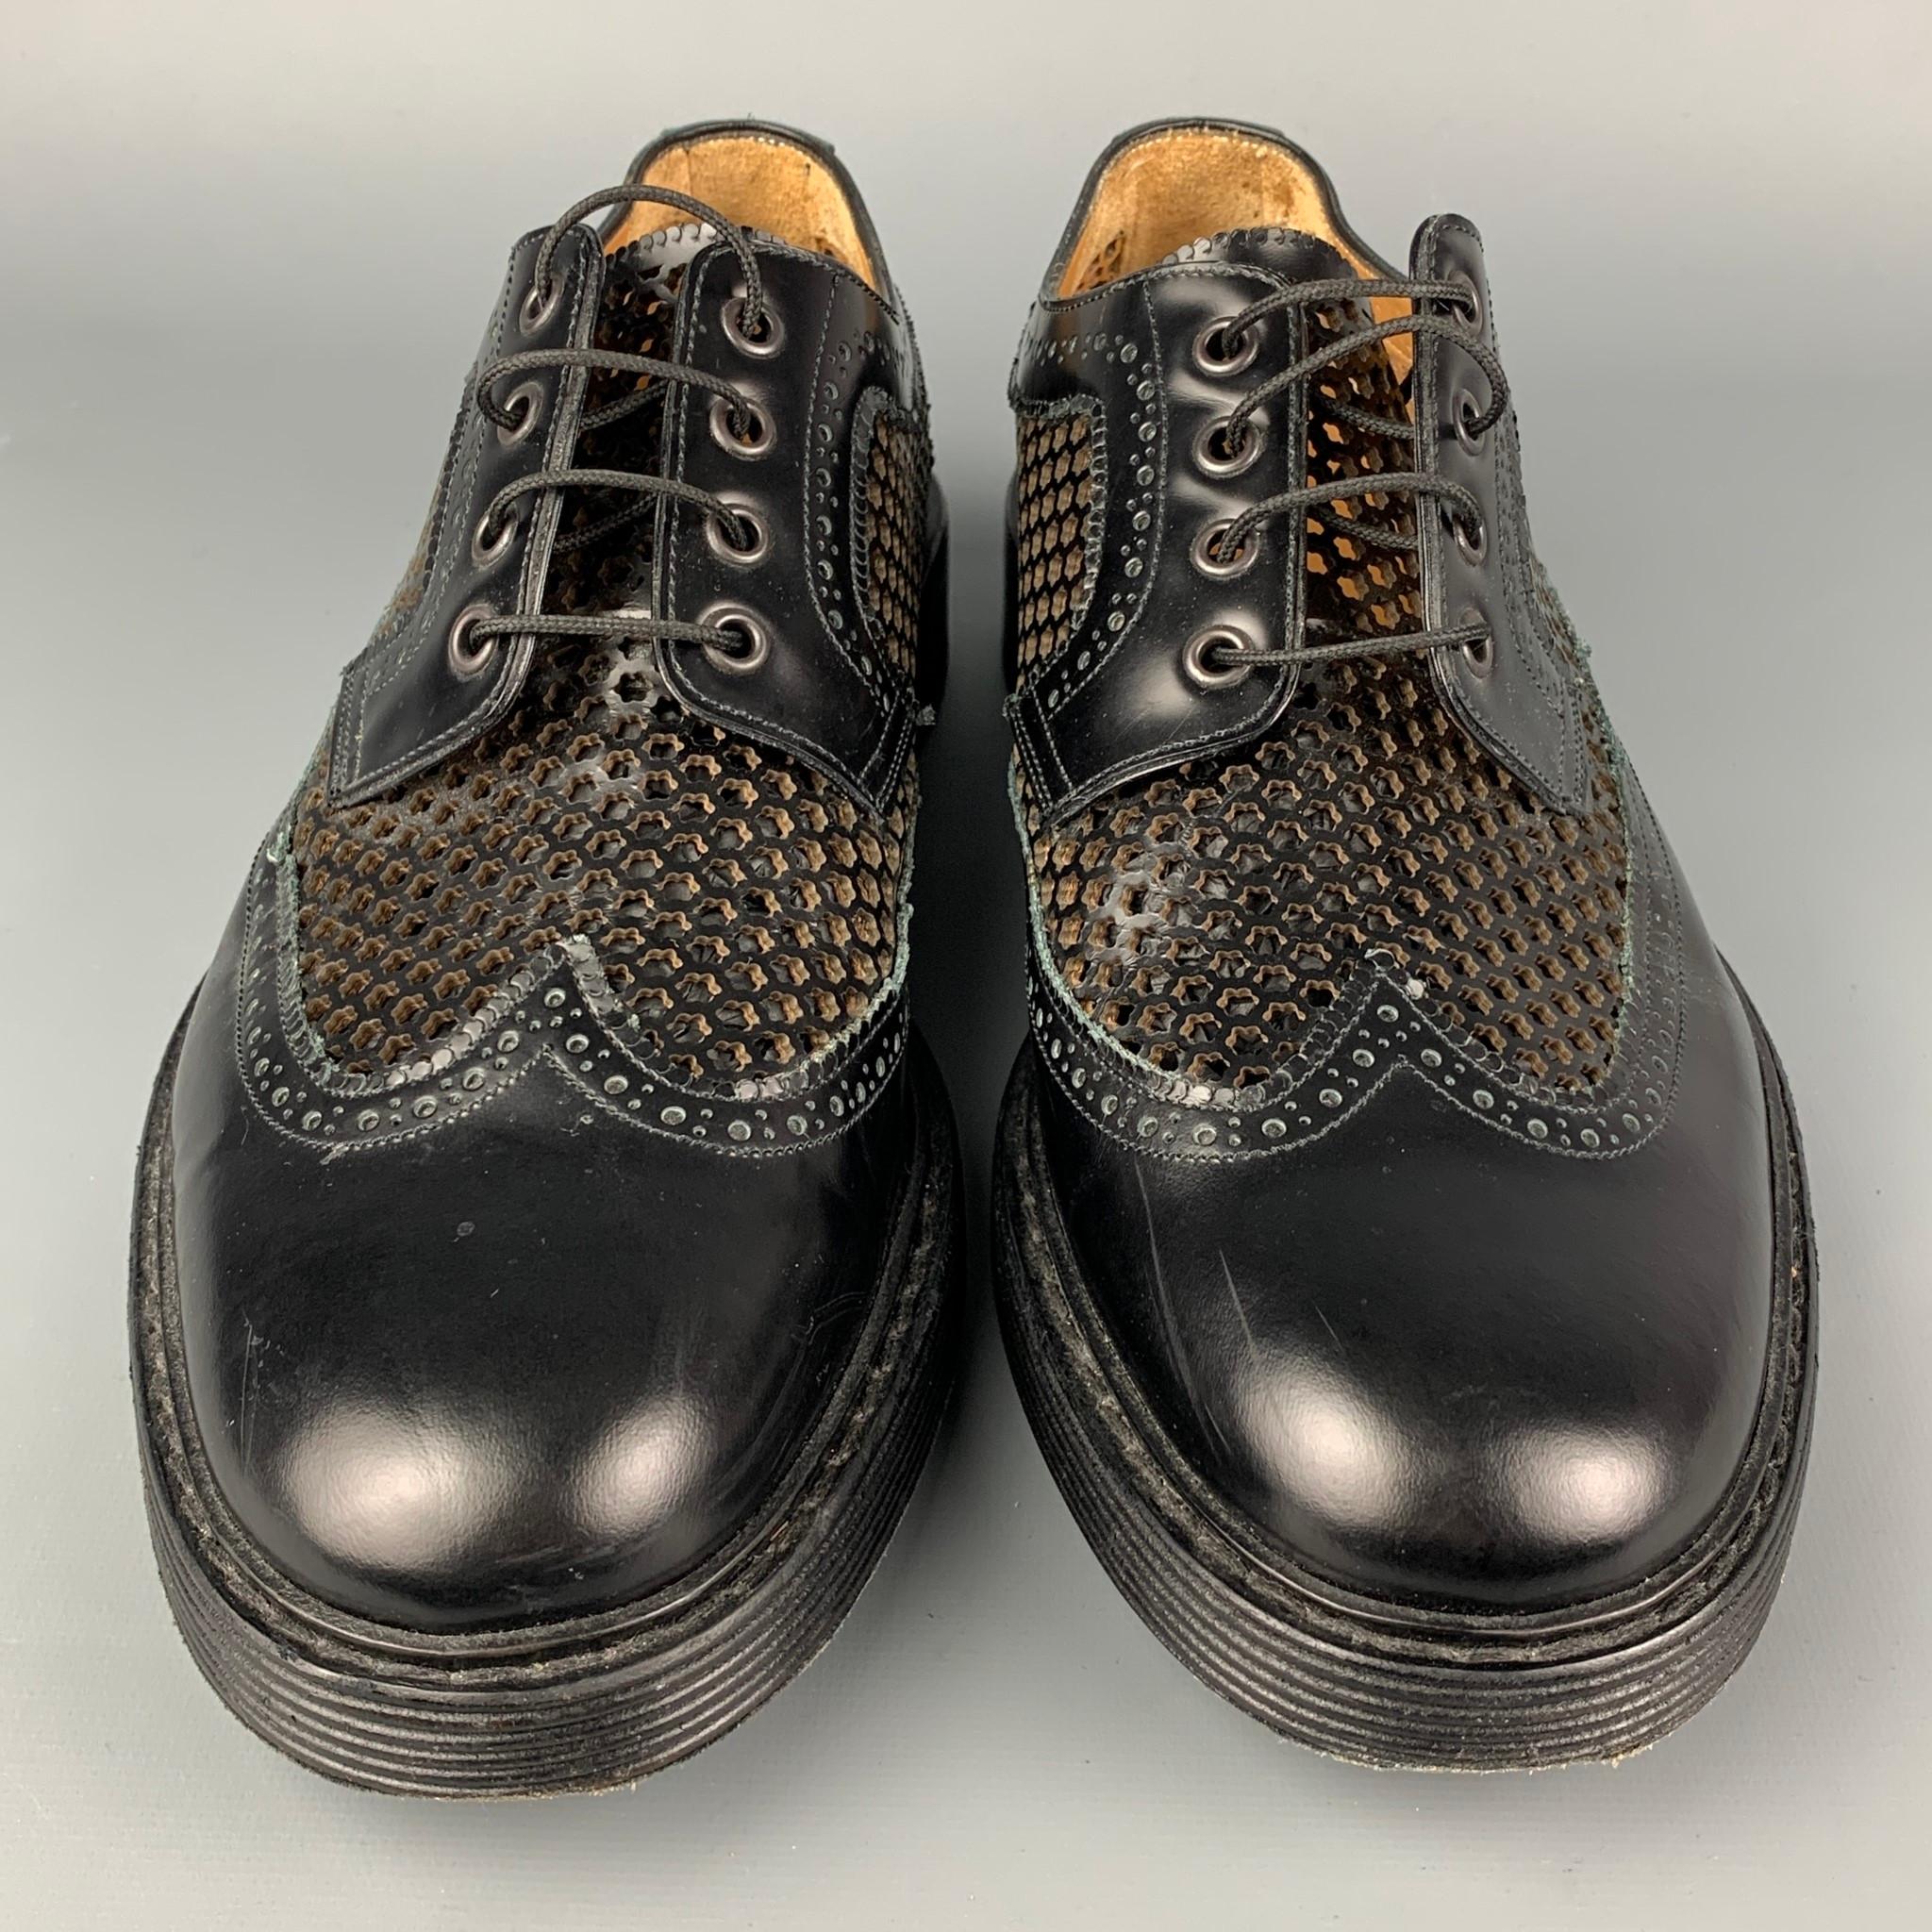 Men's MARC JACOBS Size 10 Black Perforated Leather Wingtip Lace Up Shoes